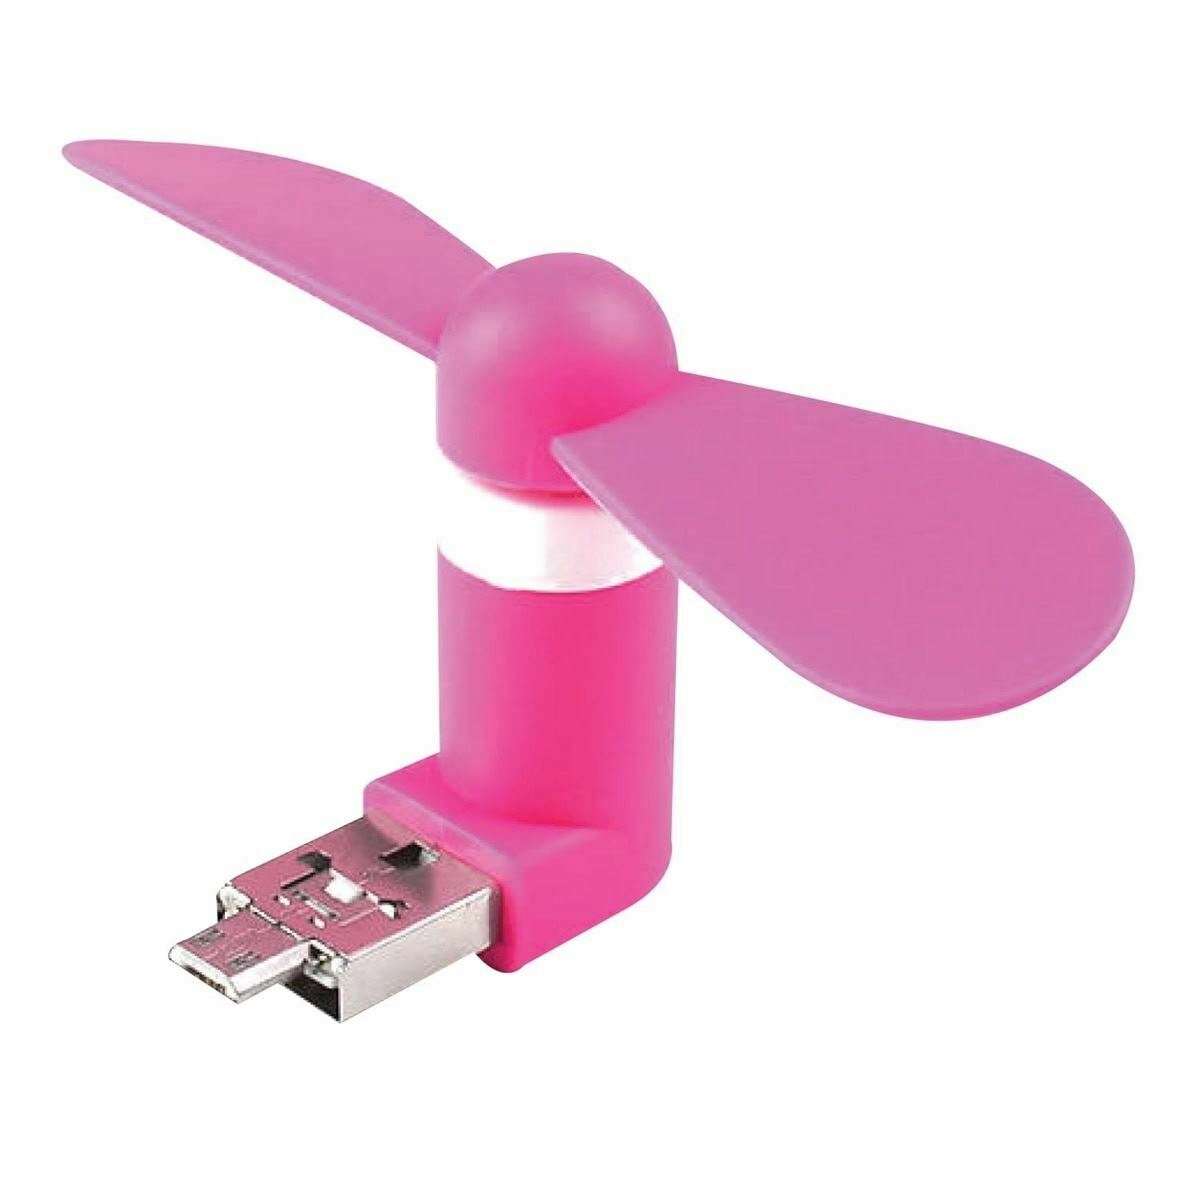 2in1 android MICRO-USB portable cooling cooler fans/fan- pink